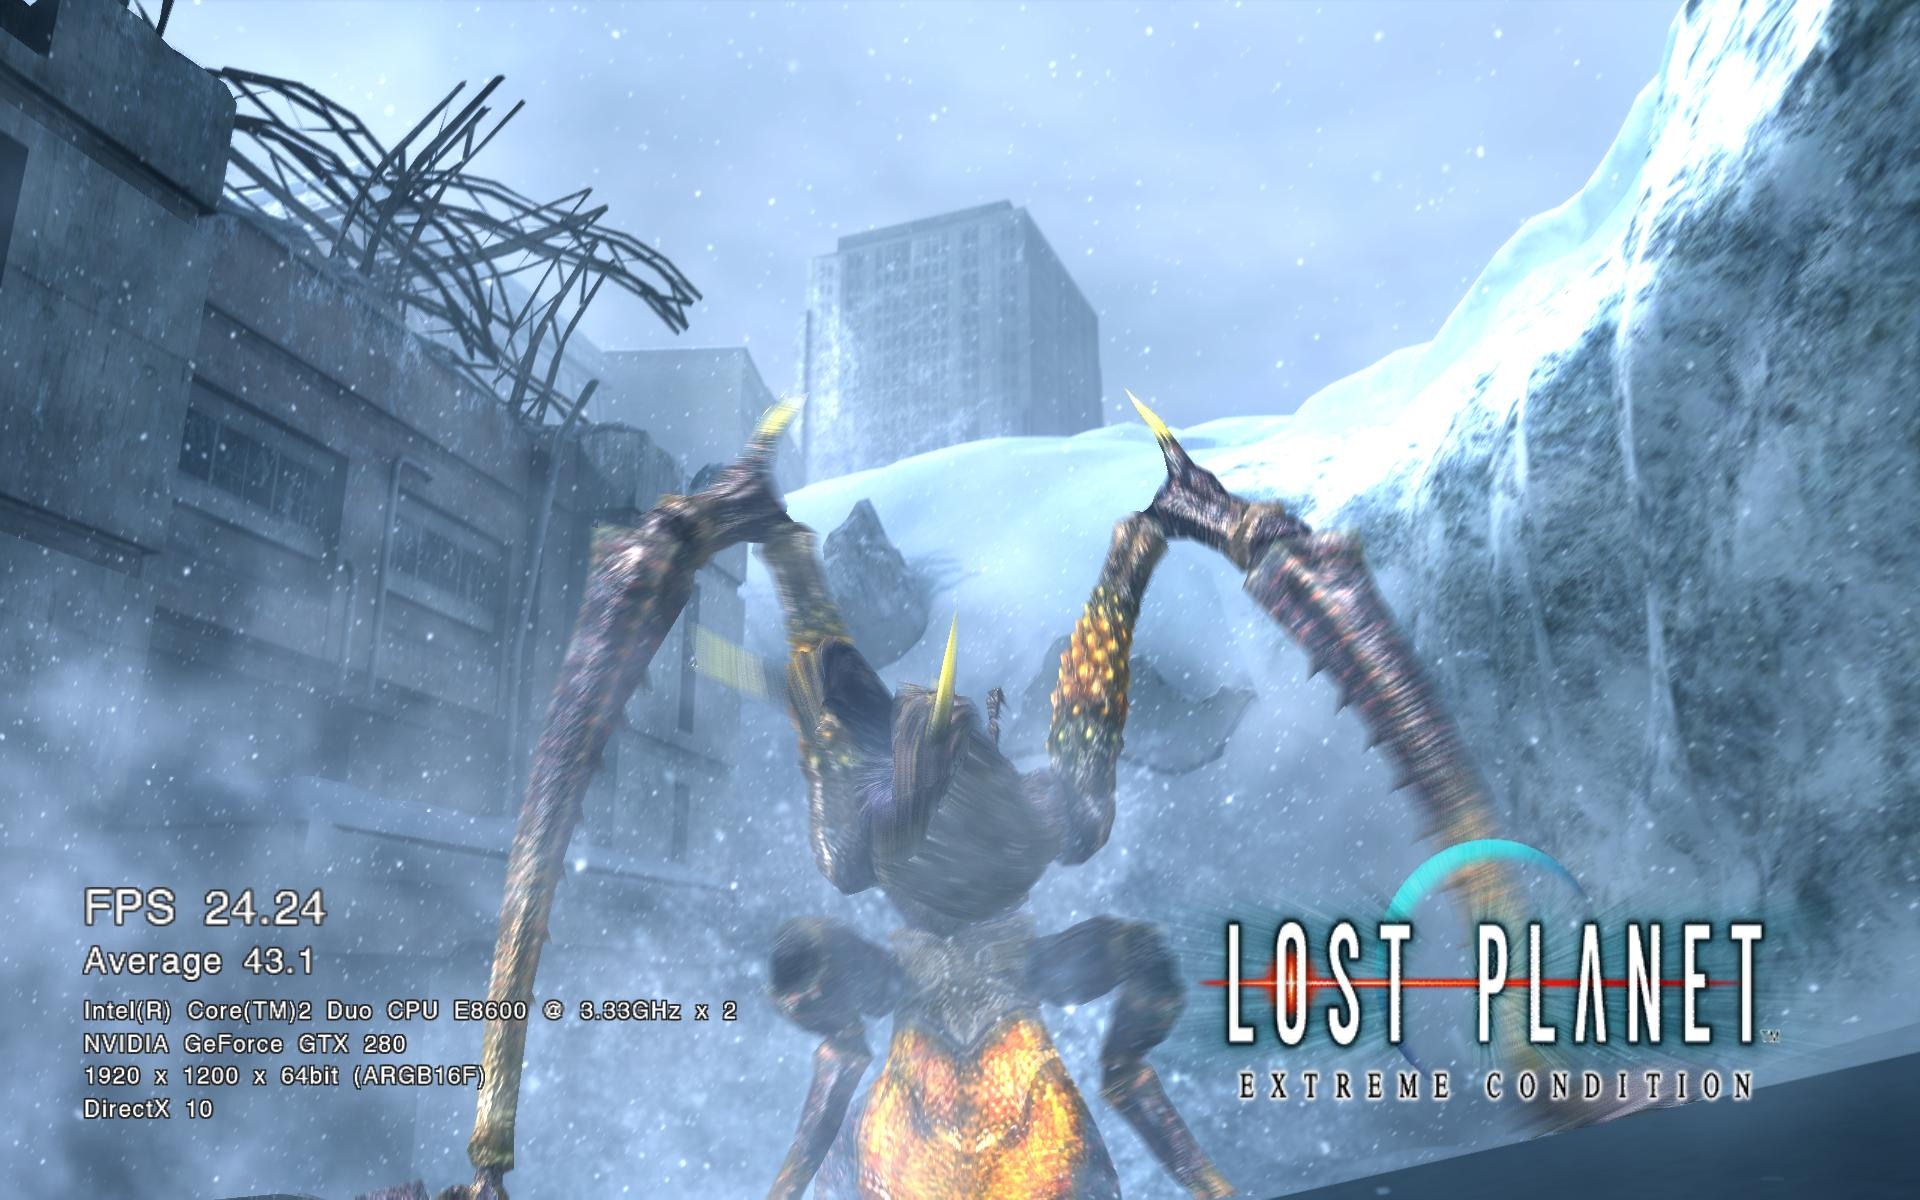 Lost Planet: Extreme Condition HD tapety na plochu #11 - 1920x1200